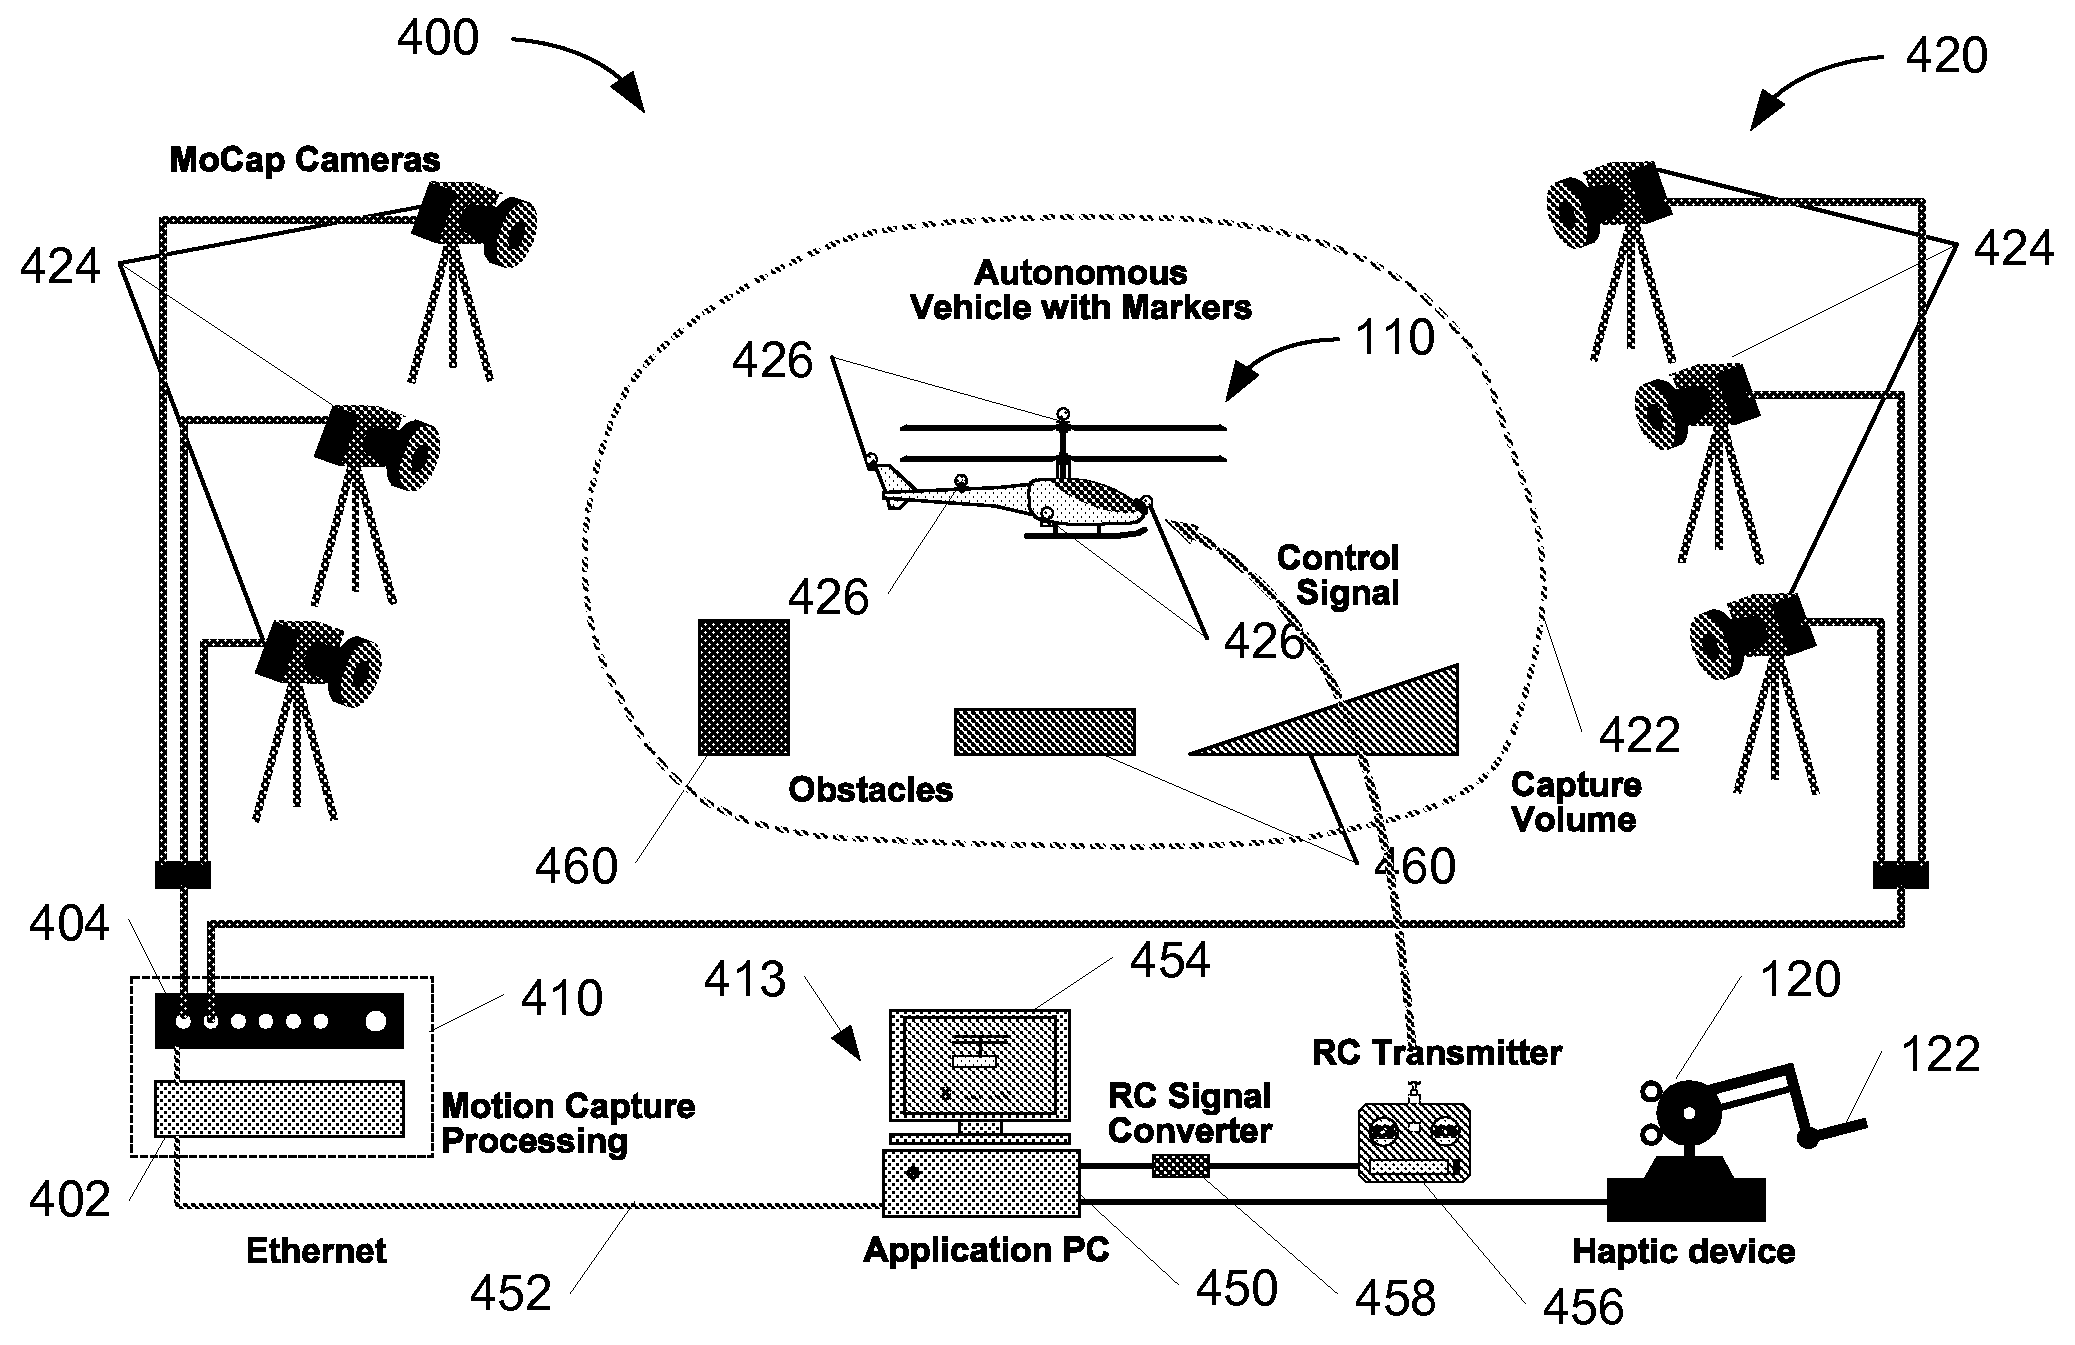 Systems and methods for haptics-enabled teleoperation of vehicles and other devices